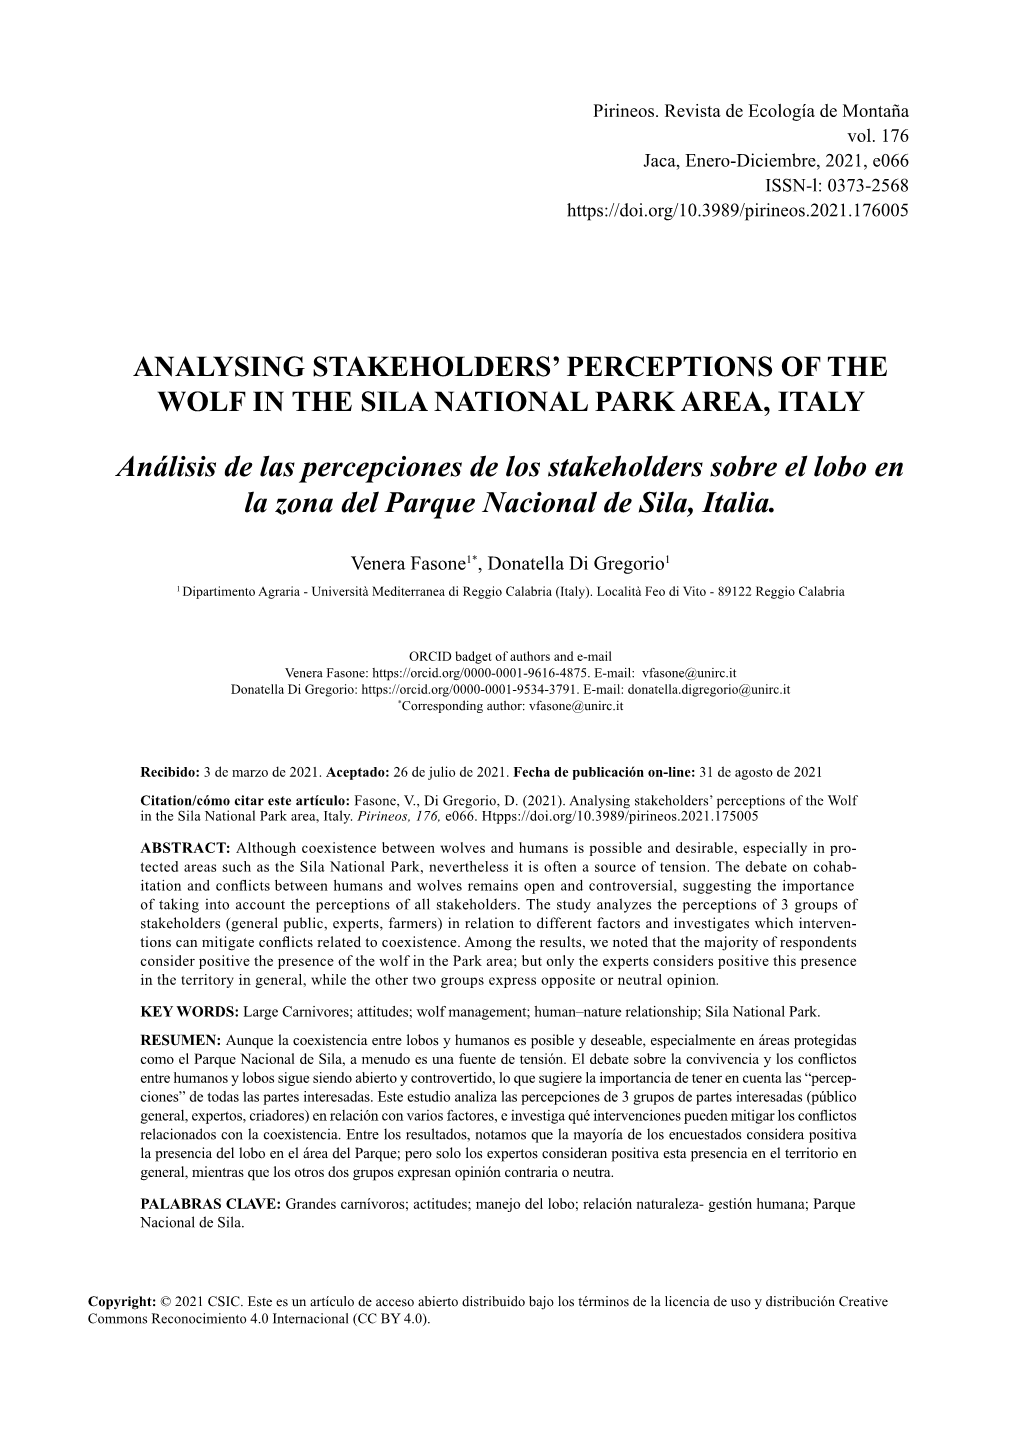 Analysing Stakeholders' Perceptions of the Wolf in the Sila National Park